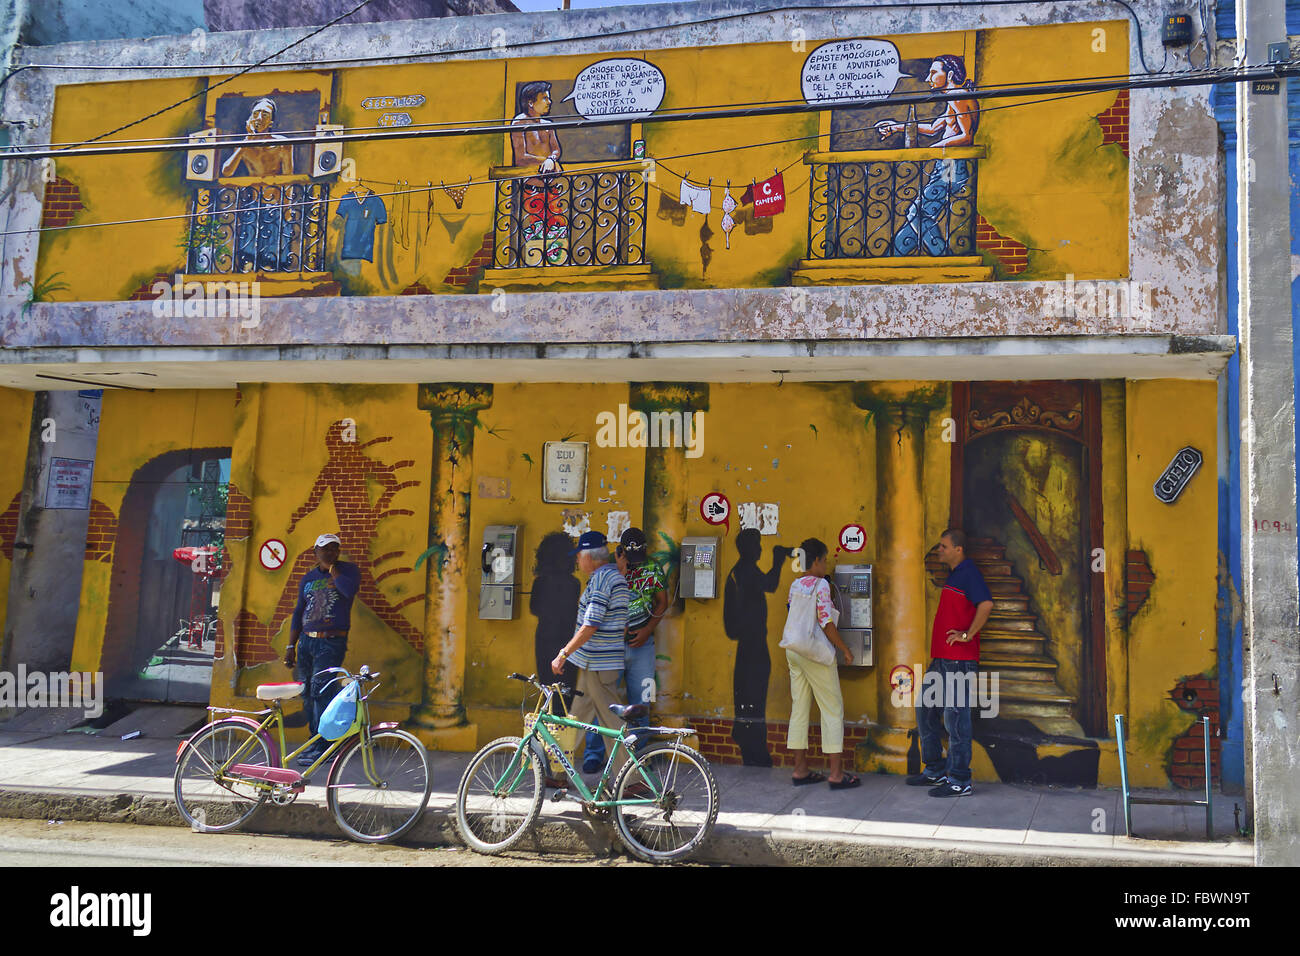 wall of a building in Camaguey, Cuba Stock Photo